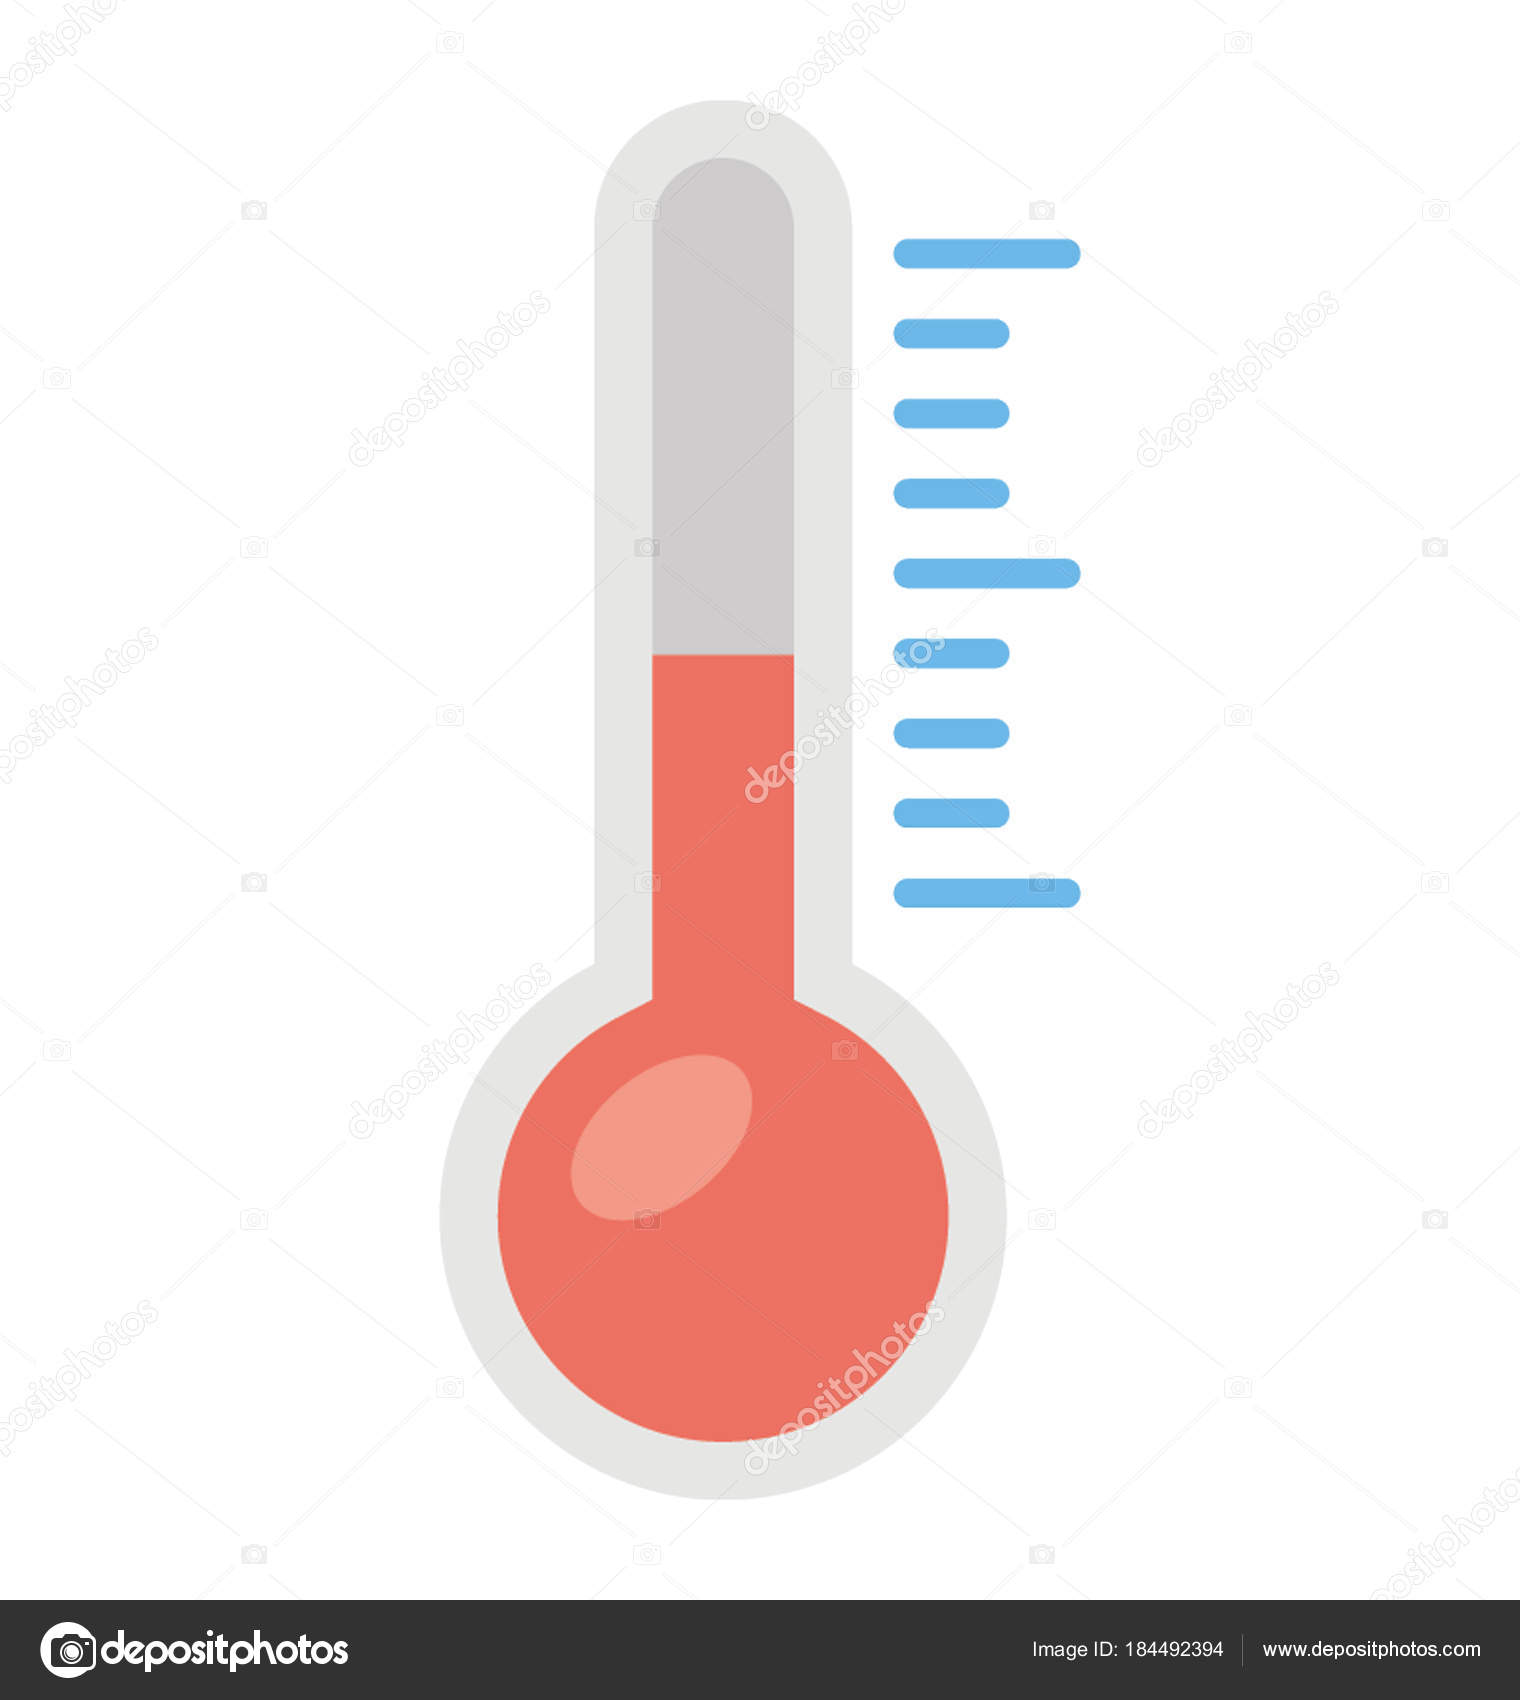 Weather thermometer stock illustration. Illustration of display - 41555996